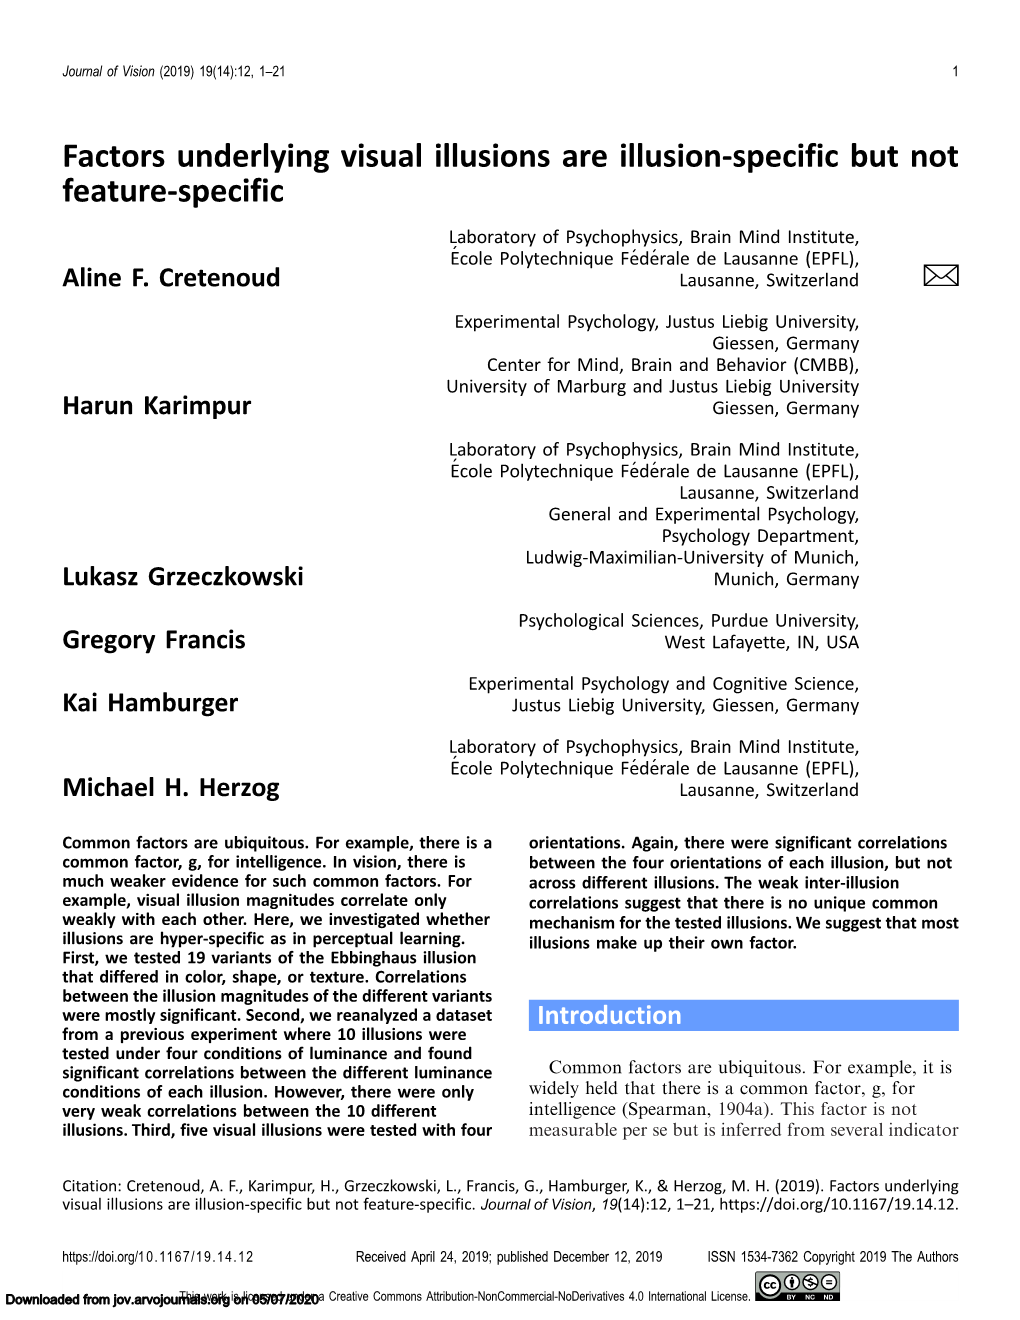 Factors Underlying Visual Illusions Are Illusion-Specific but Not Feature-Specific